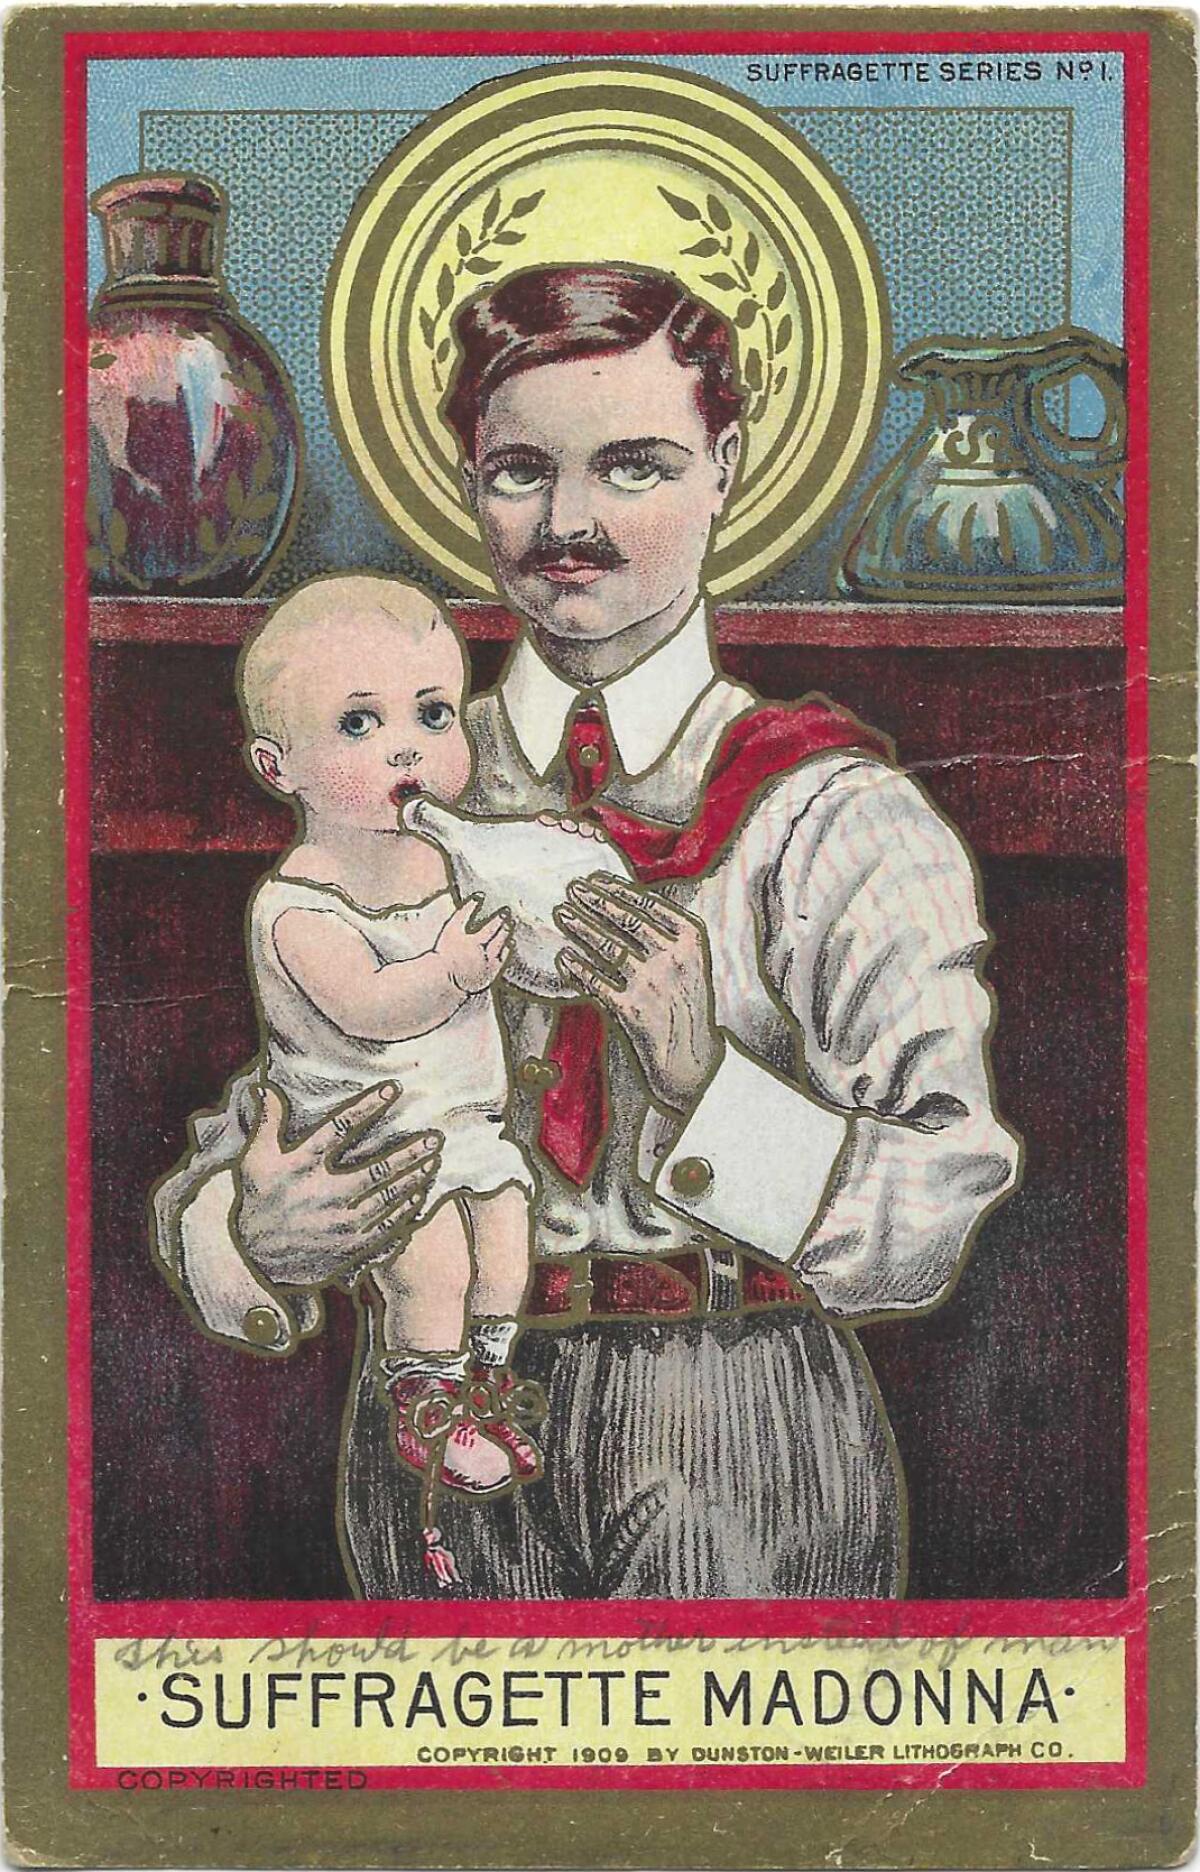 A man, depicted as "Suffragette Madonna," holds a baby and gives it a bottle of milk.